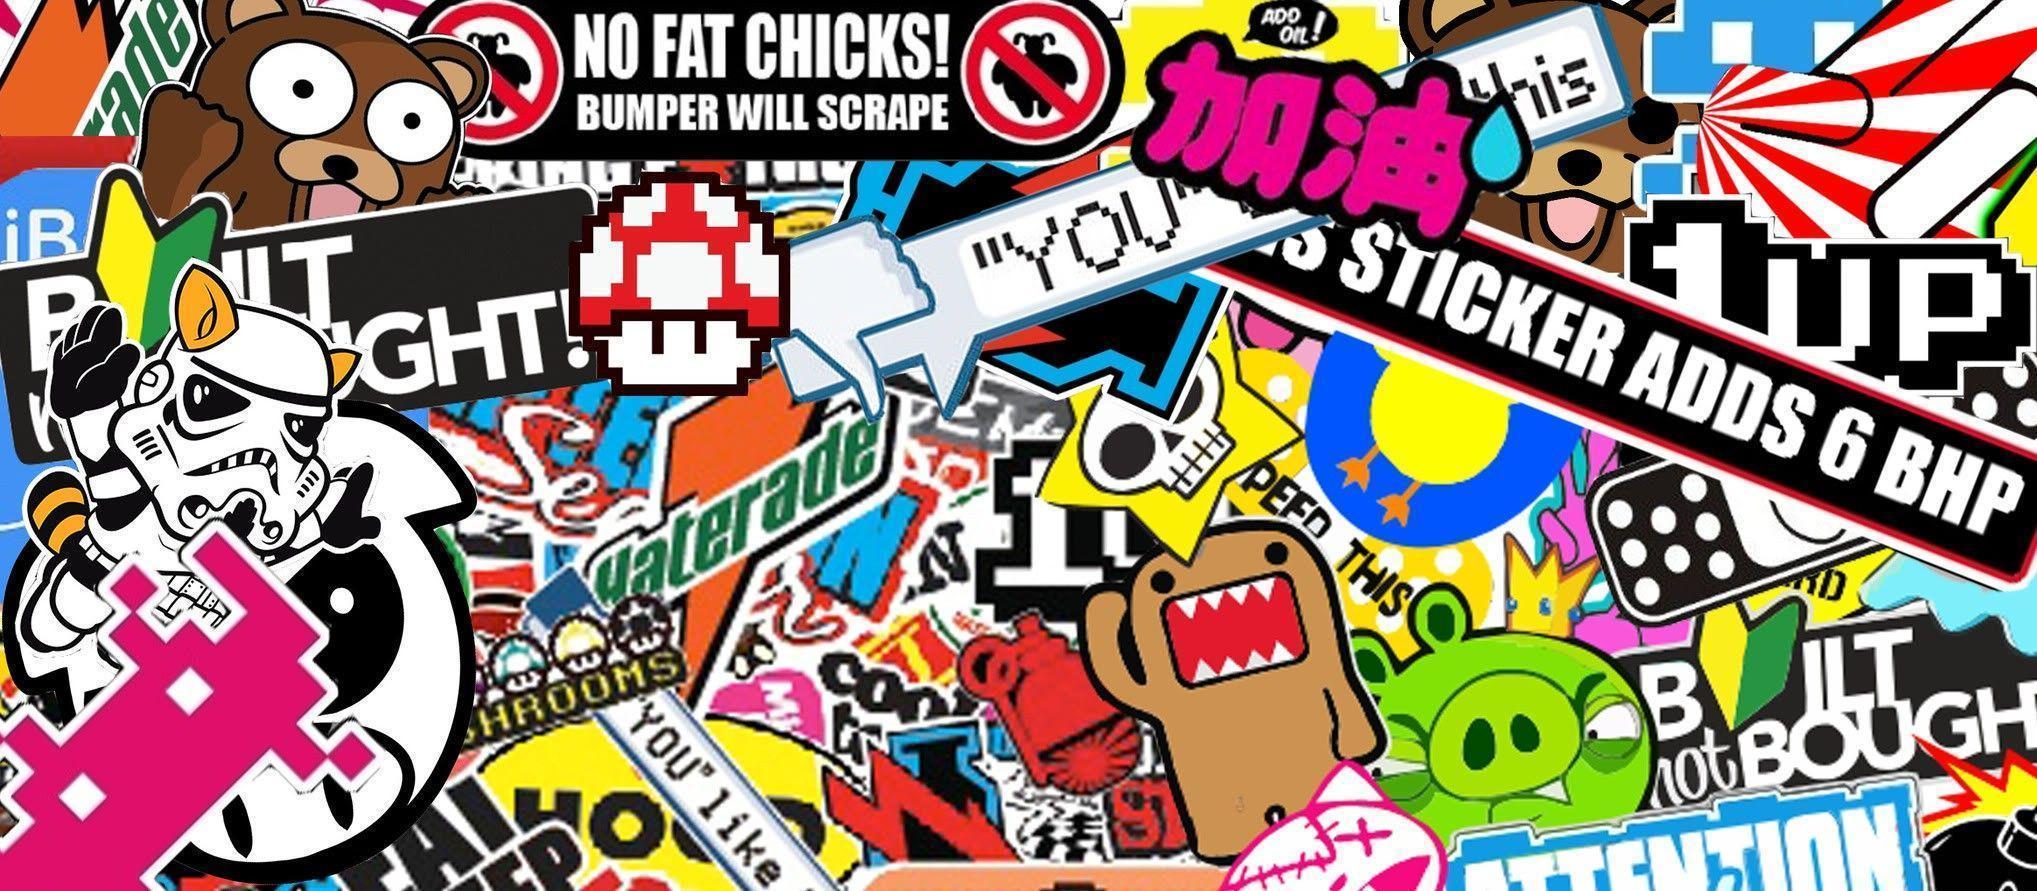 View Wallpaper Hd Black And White Sticker Bomb Wallpaper Pictures